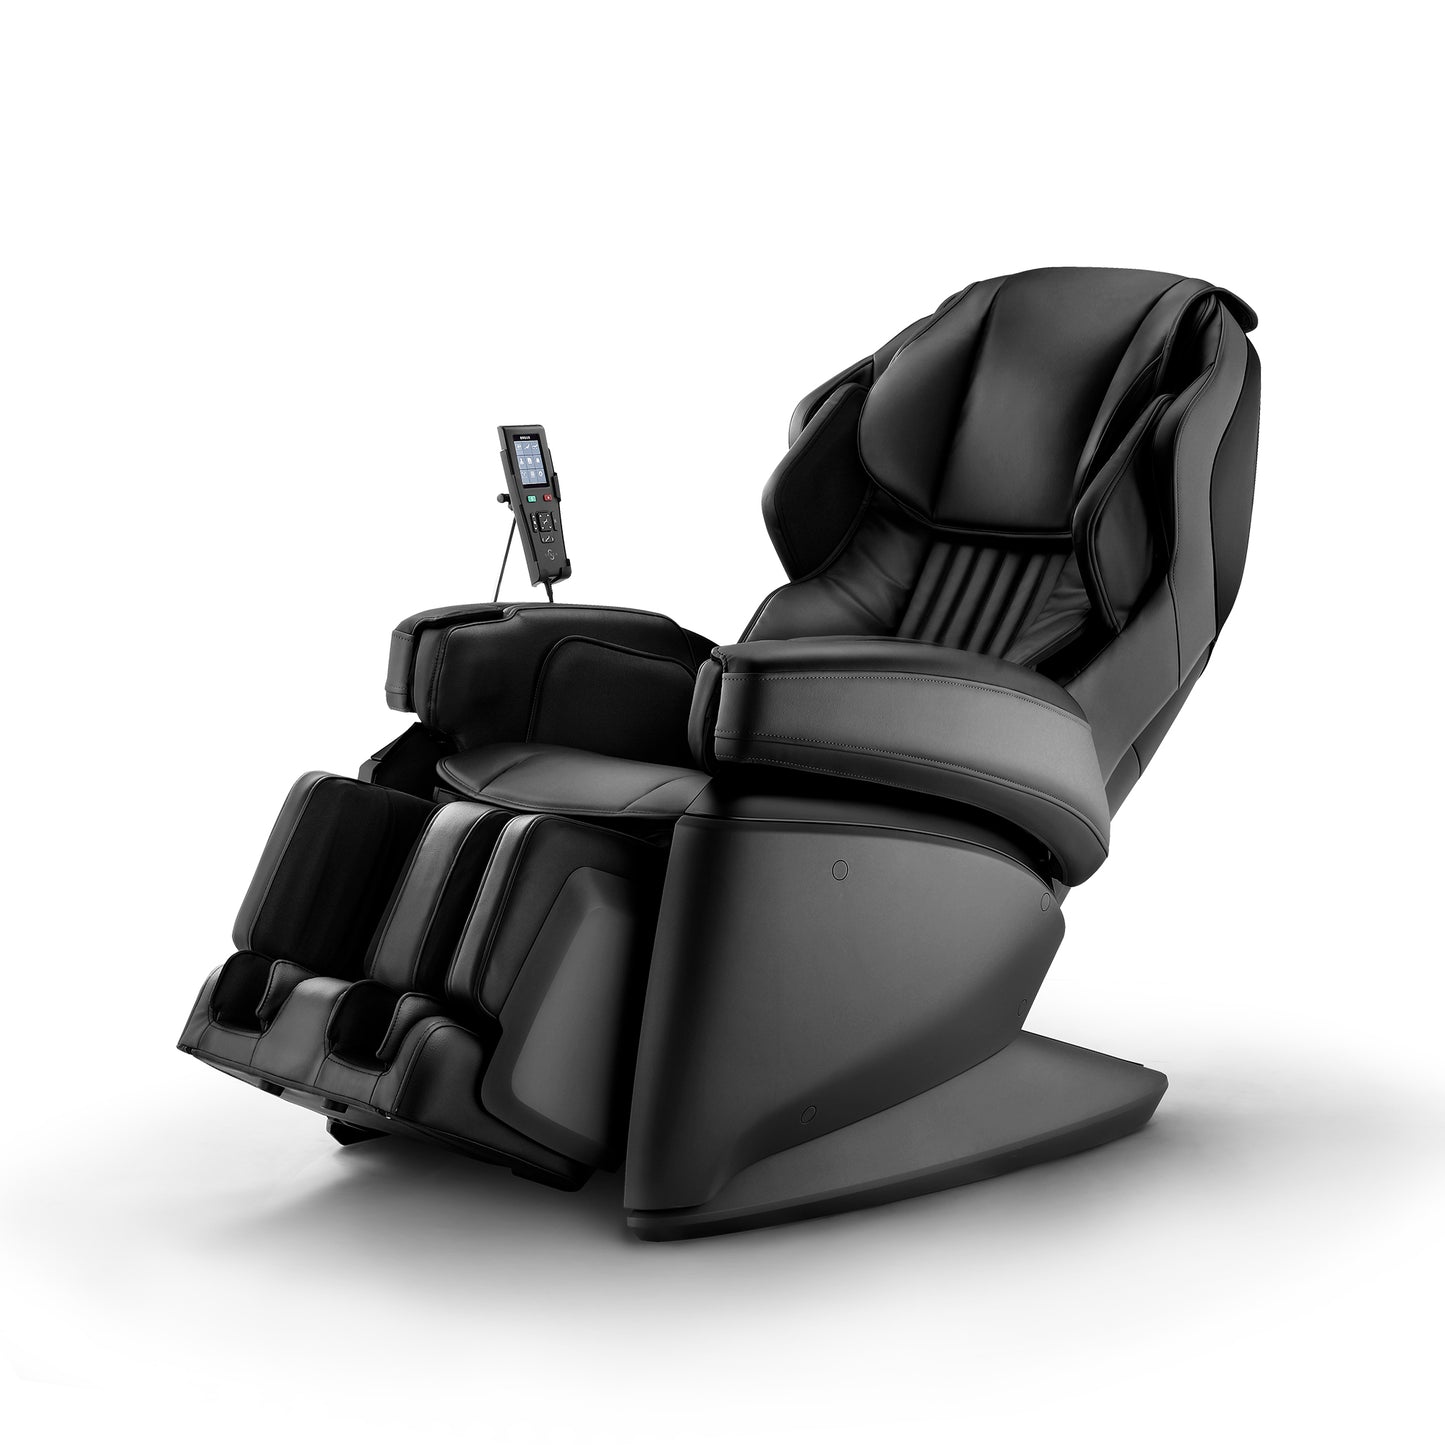 Synca JP-1000 - Made in Japan 4D Ultra Premium Massage chair